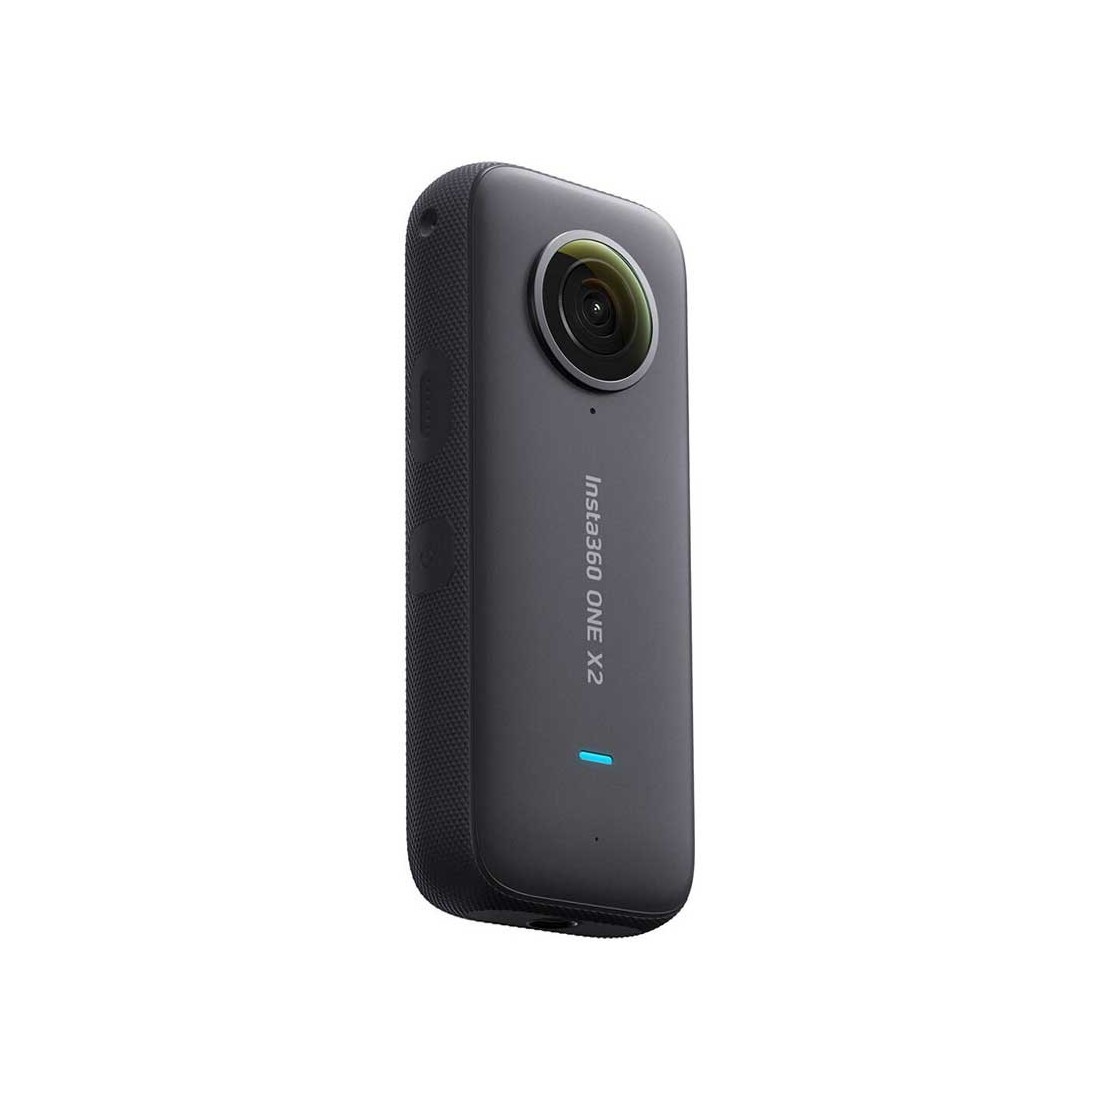 Insta 360 One X 2 action camera